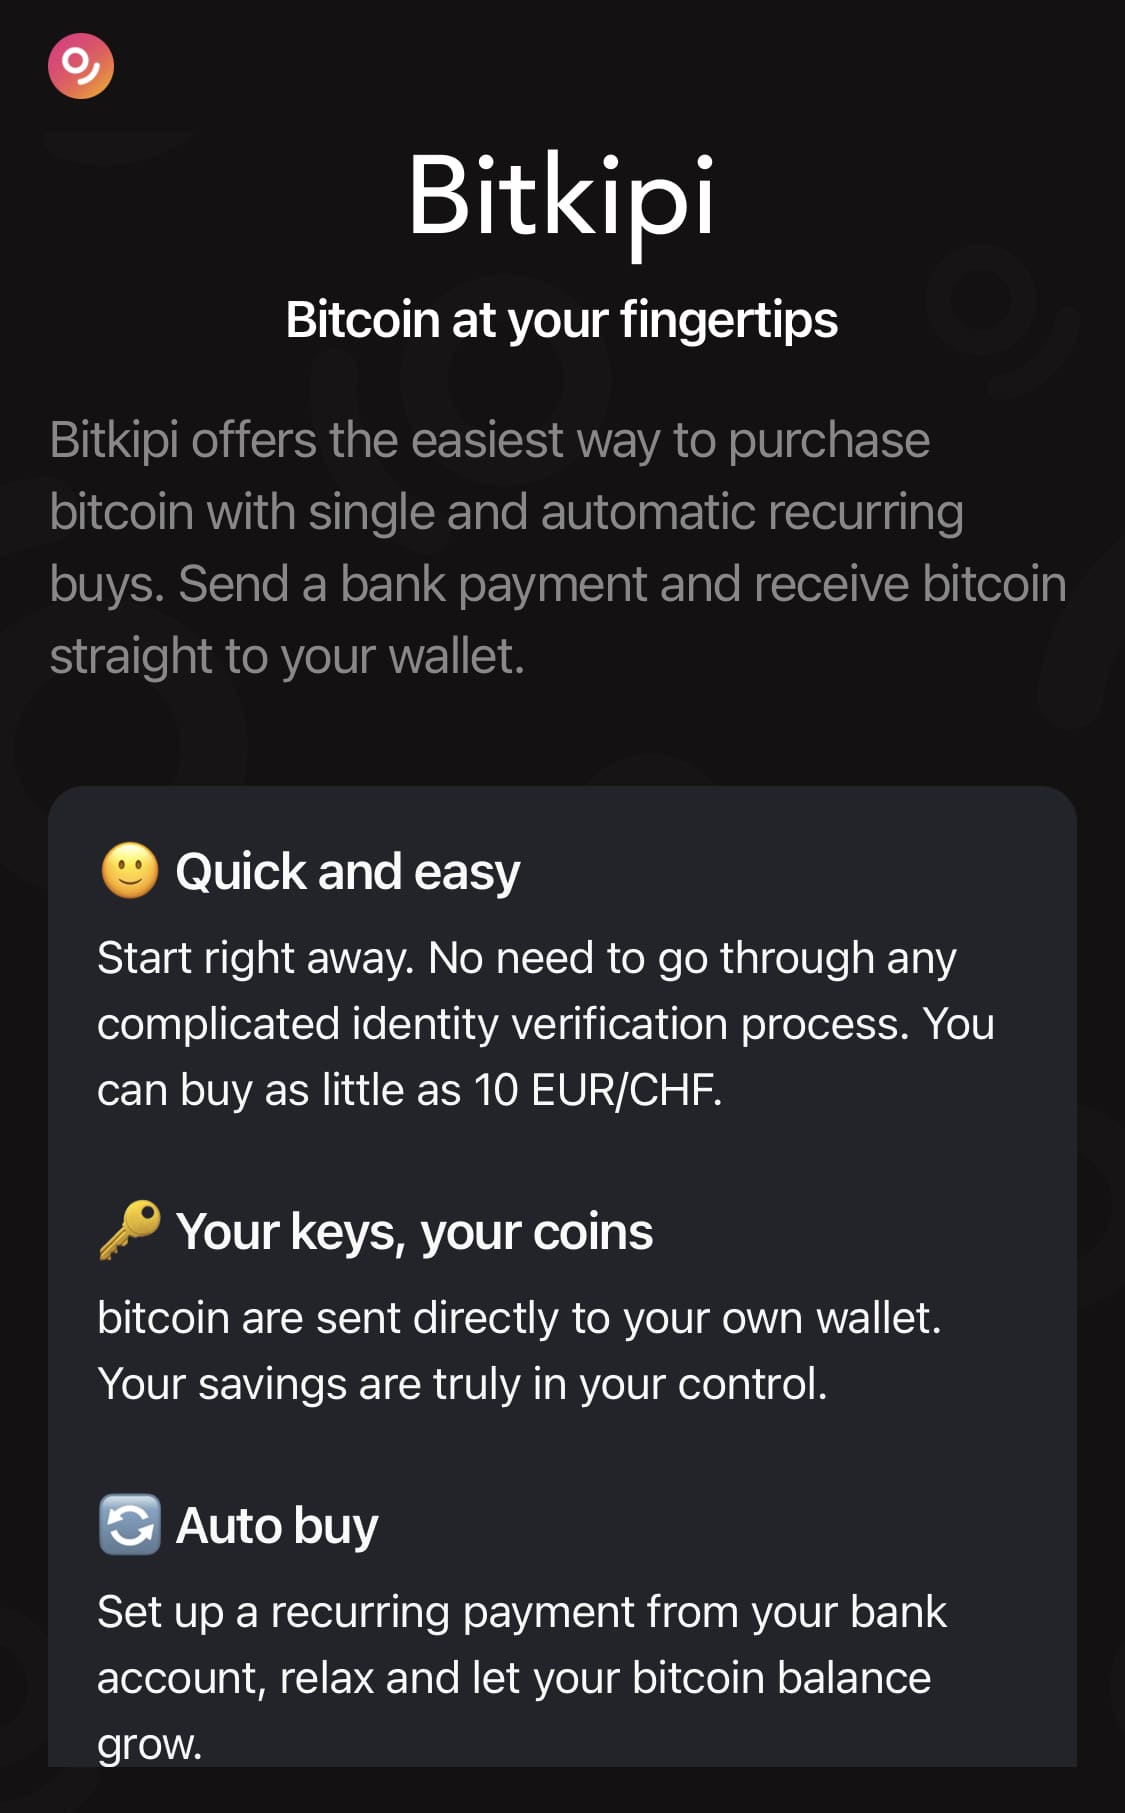 With Bitkipi we can buy bitcoin anonymously